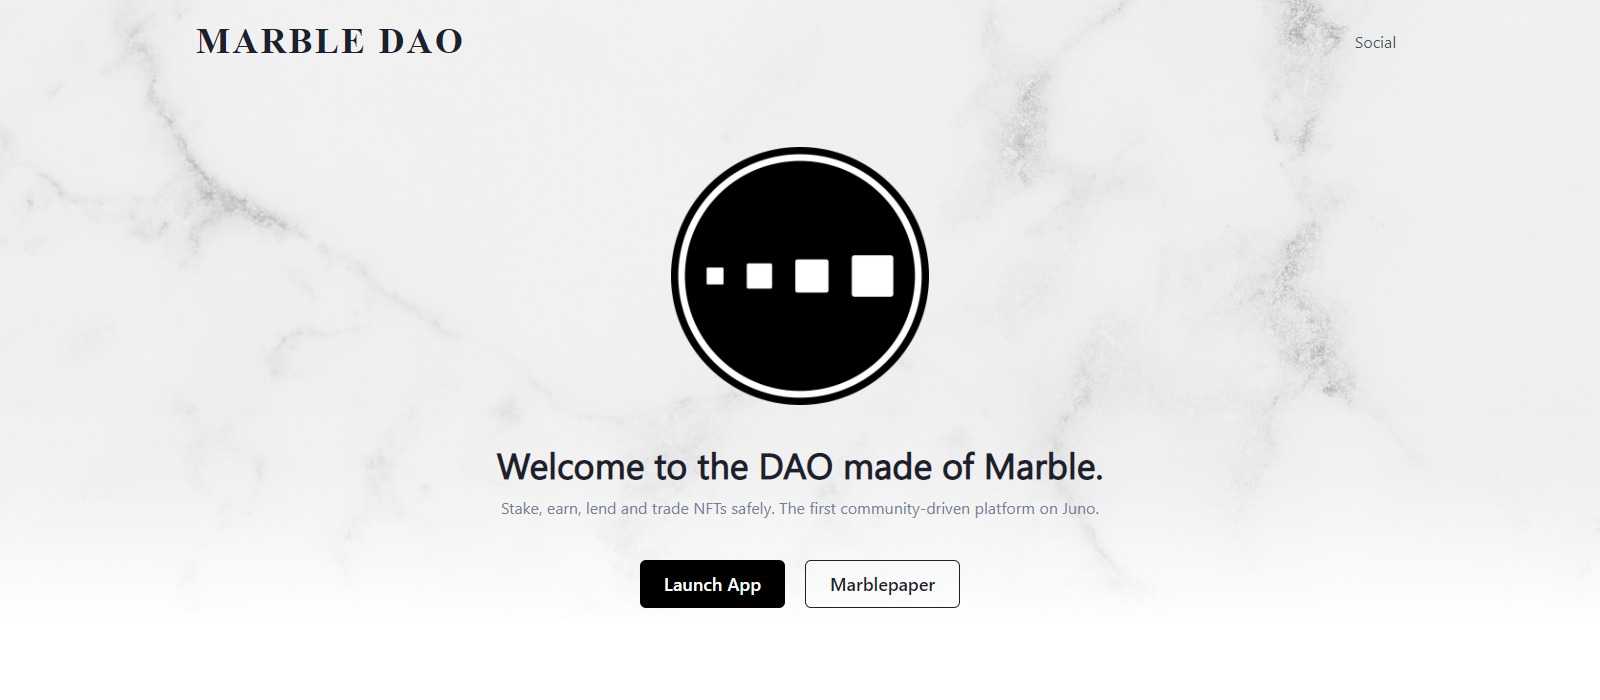 Marble DAO Airdrop Review: Stake, earn, lend and trade NFTs safely